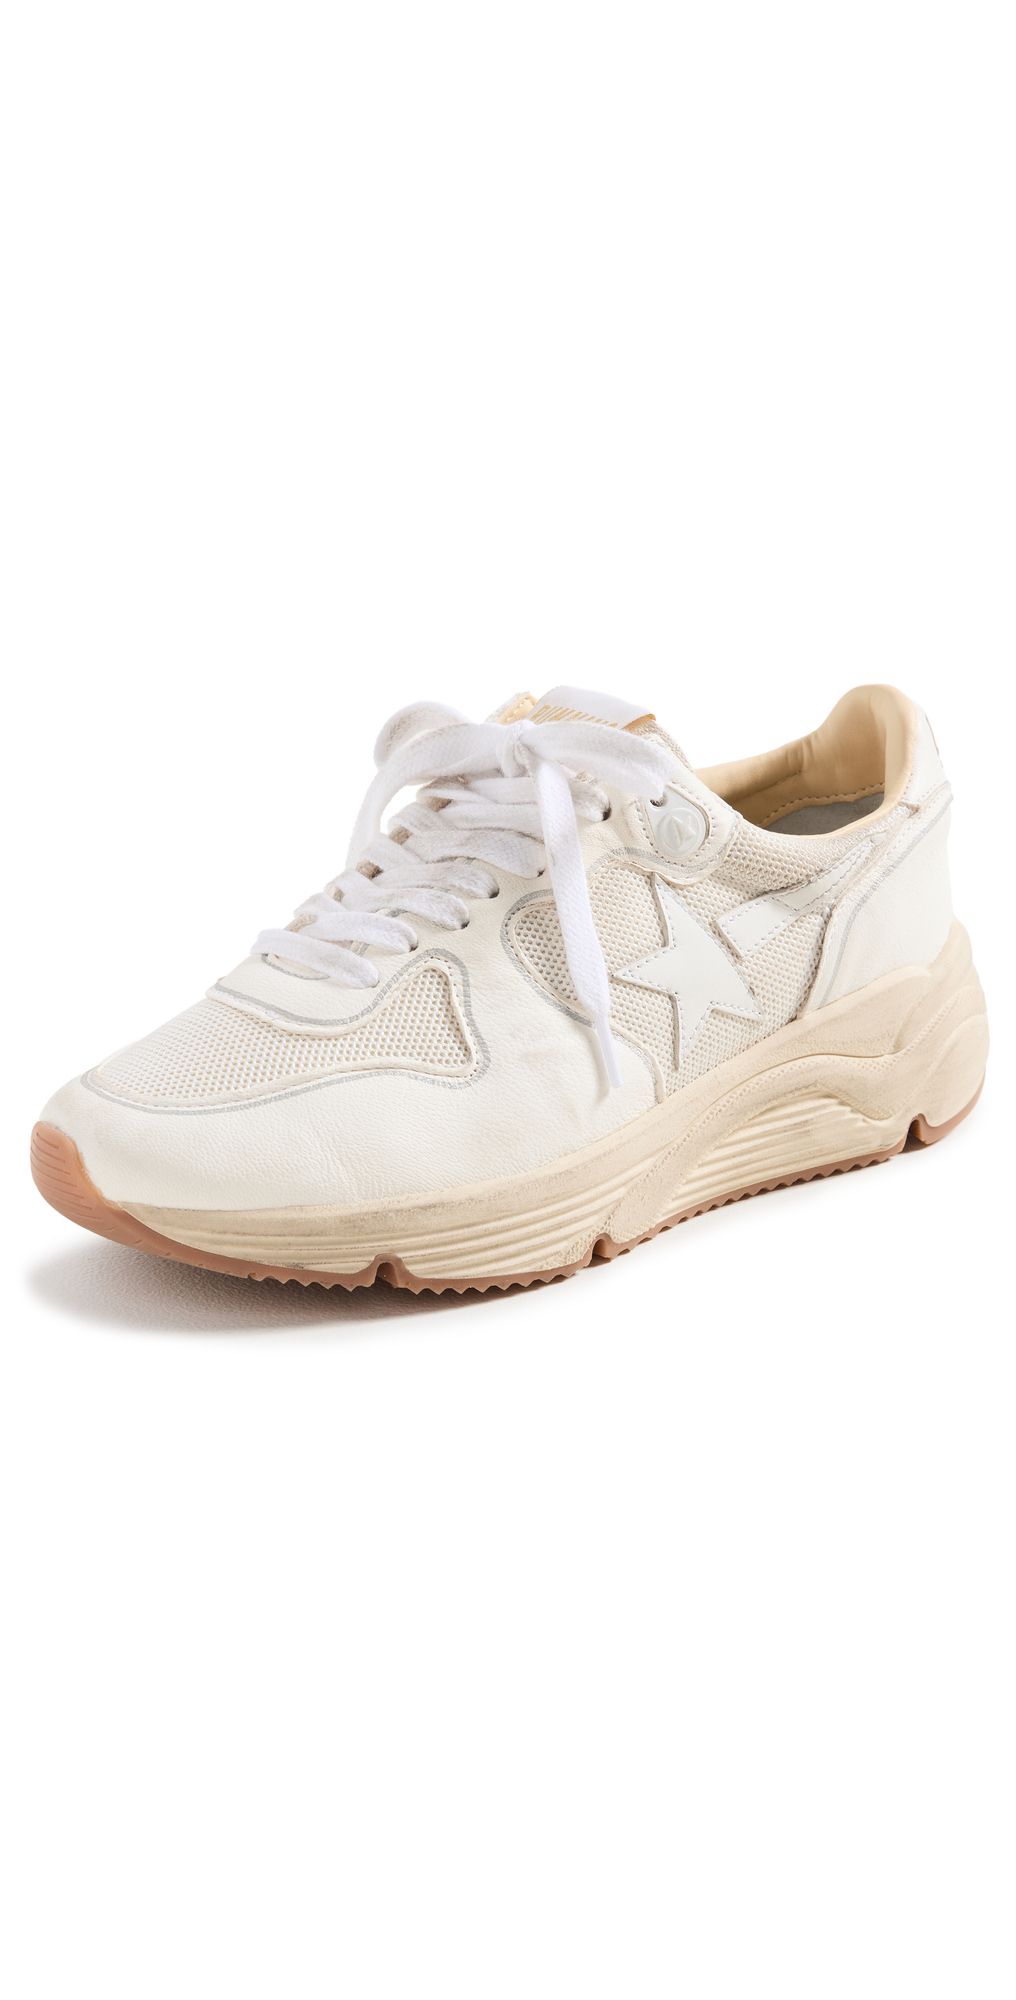 Running Sole Nappa Upper Toe Box Suede Sneakers | Shopbop